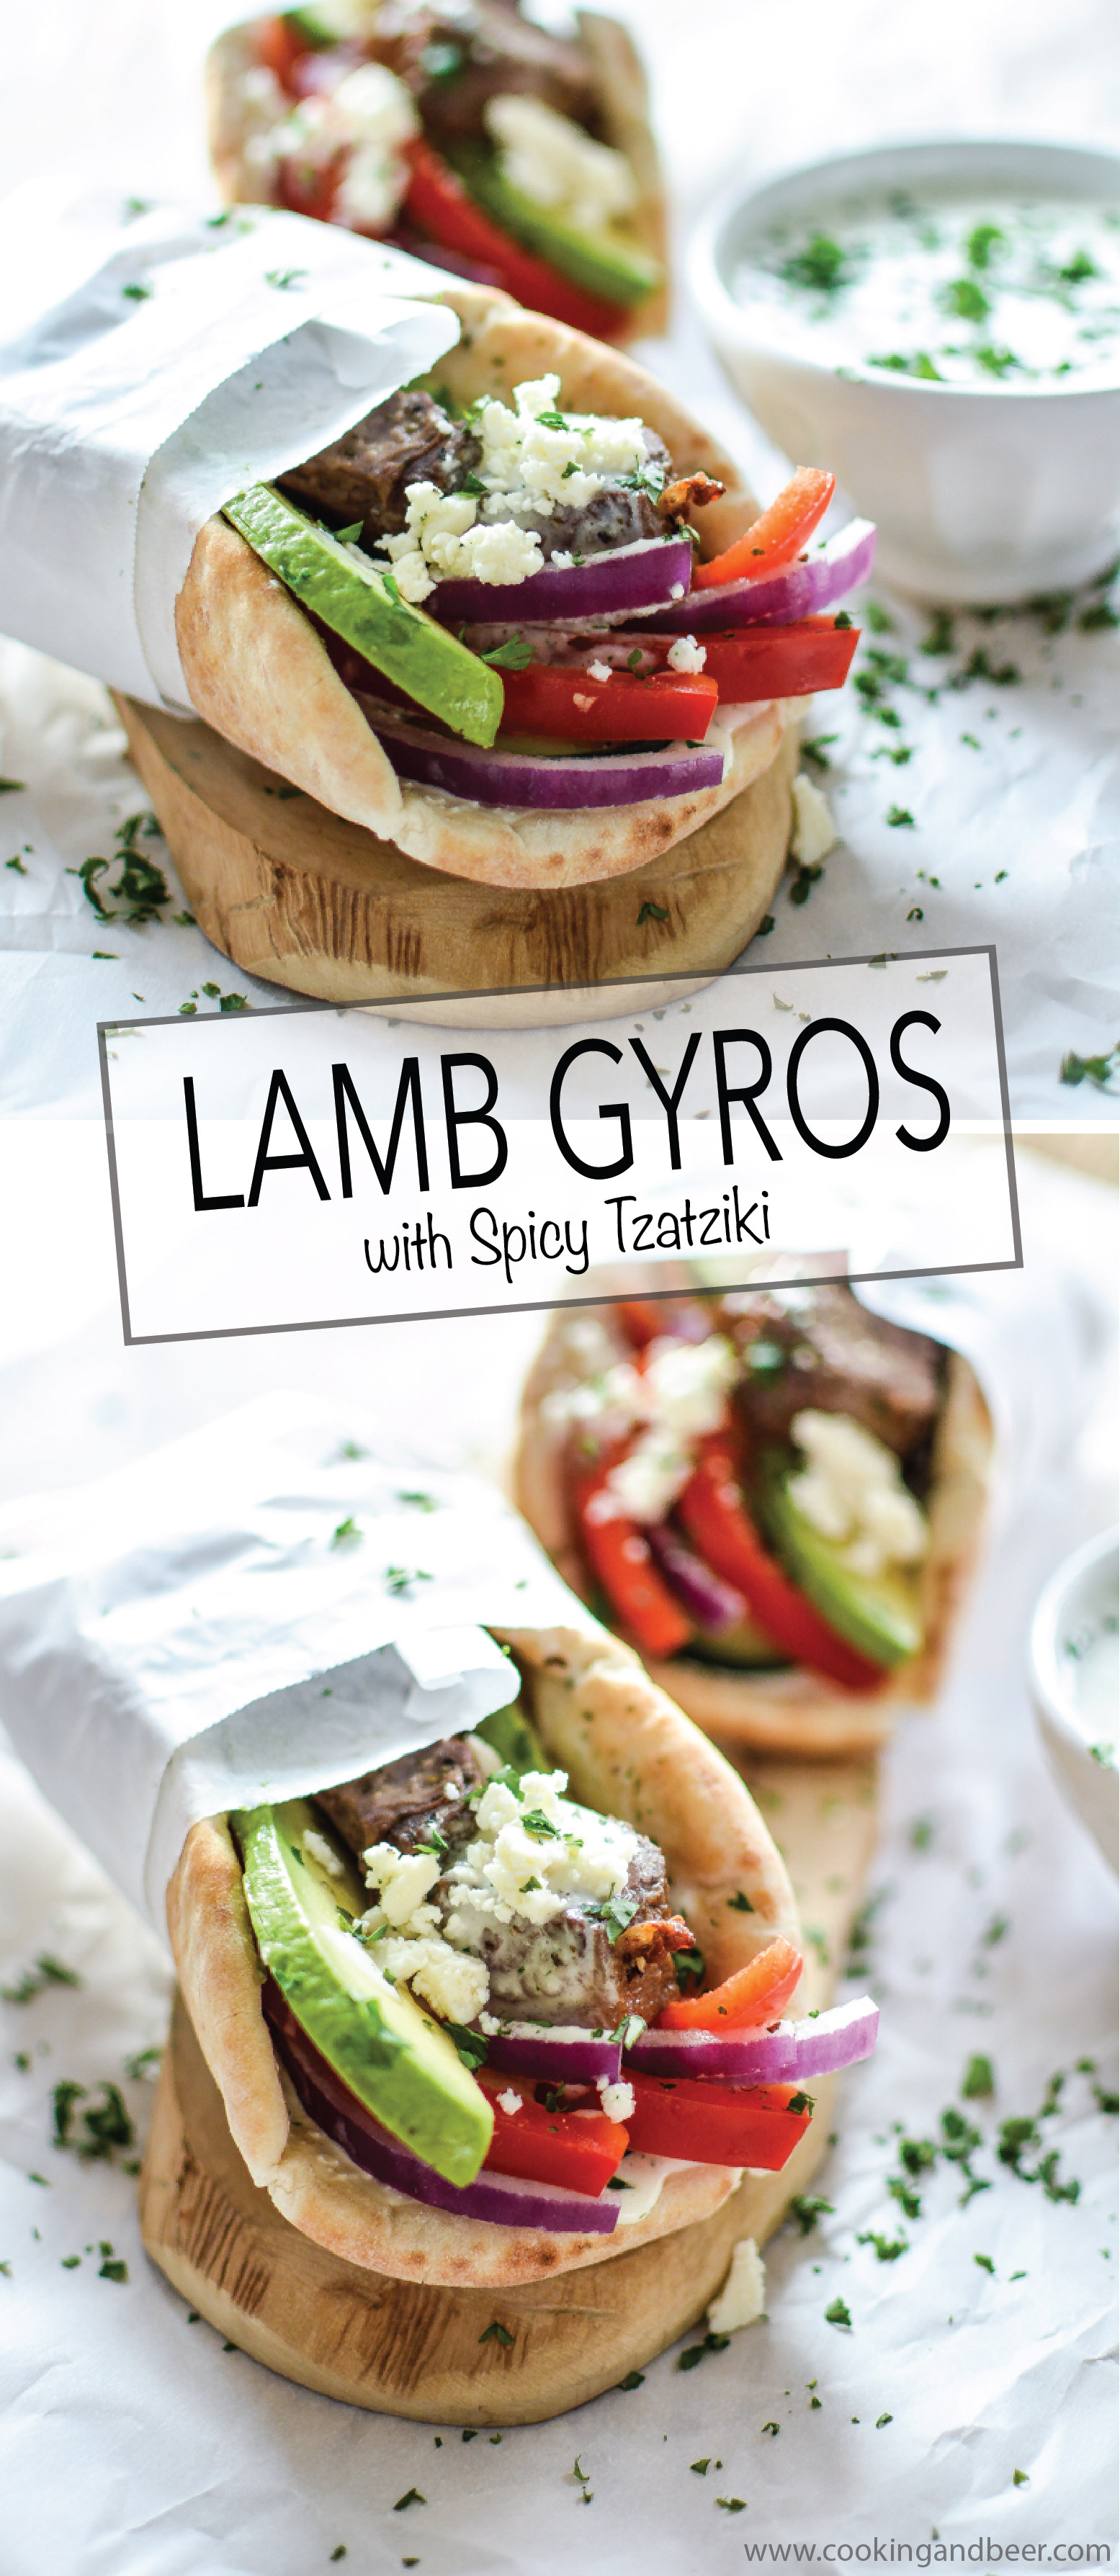 Recipe for Lamb Gyros with Spicy Tzatziki is perfect for lunch or dinner! | www.cookingandbeer.com